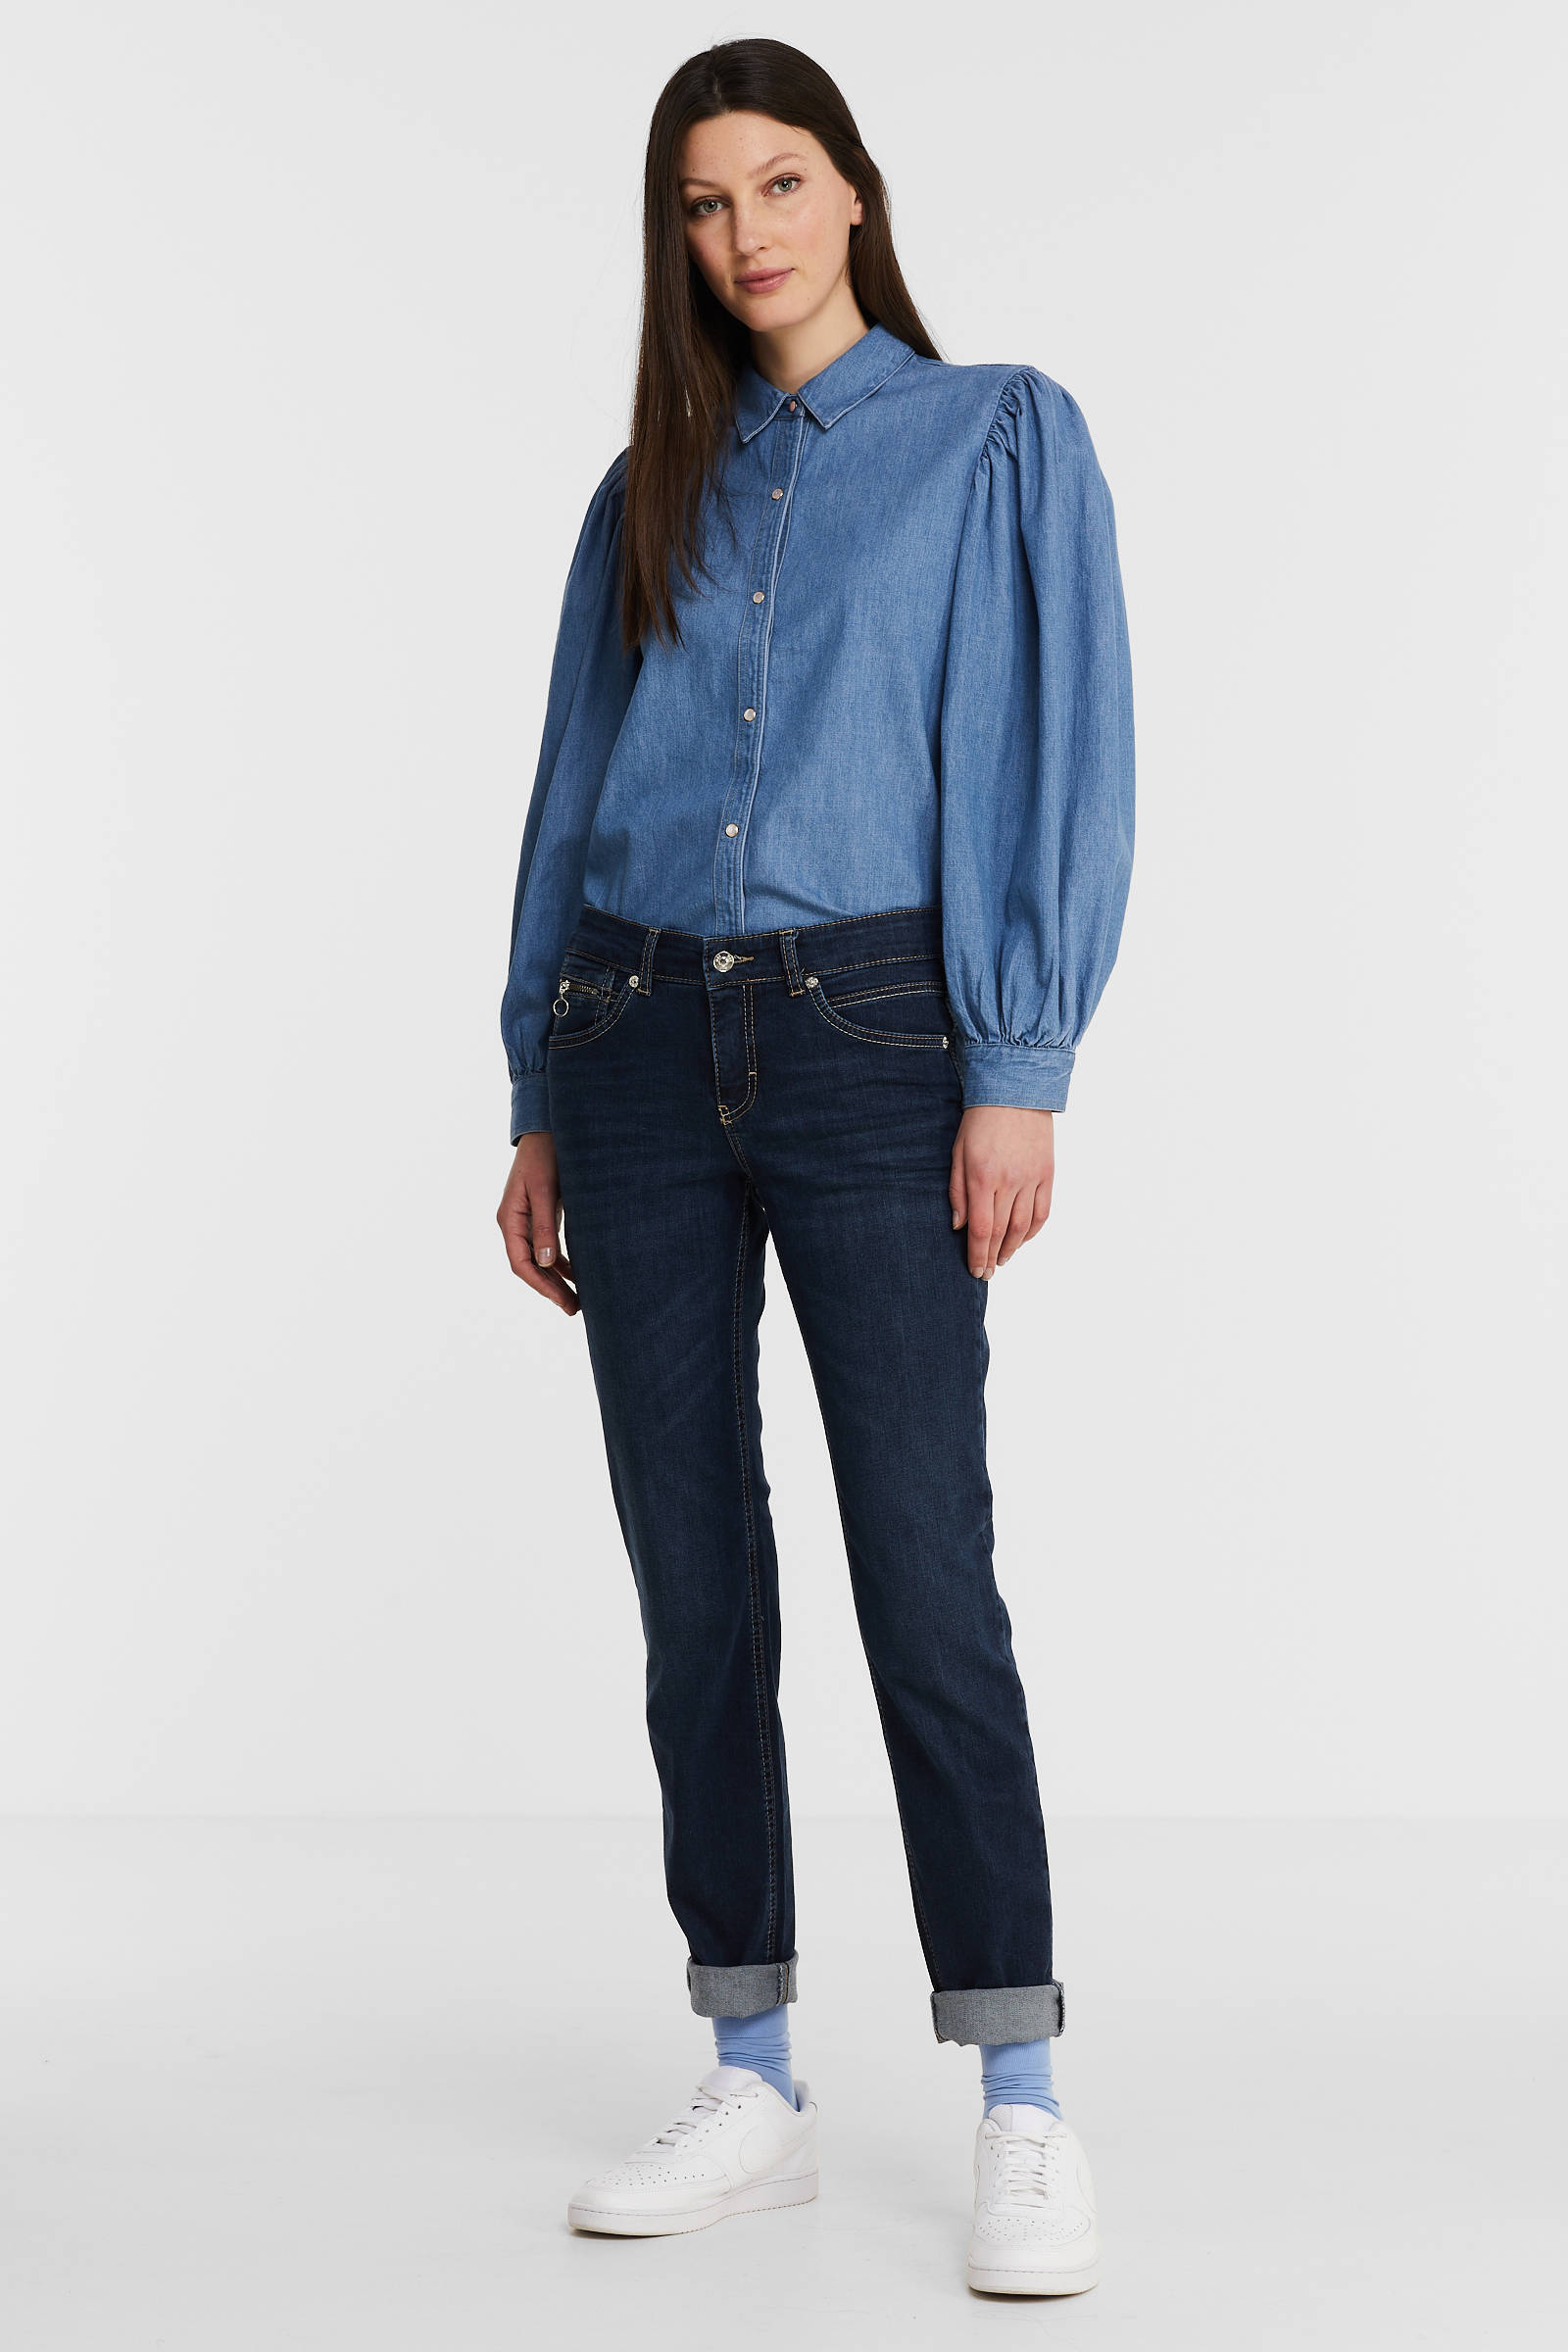 Dream Jeans Tecno by MAC Tube jeans wit casual uitstraling Mode Spijkerbroeken Tube jeans 